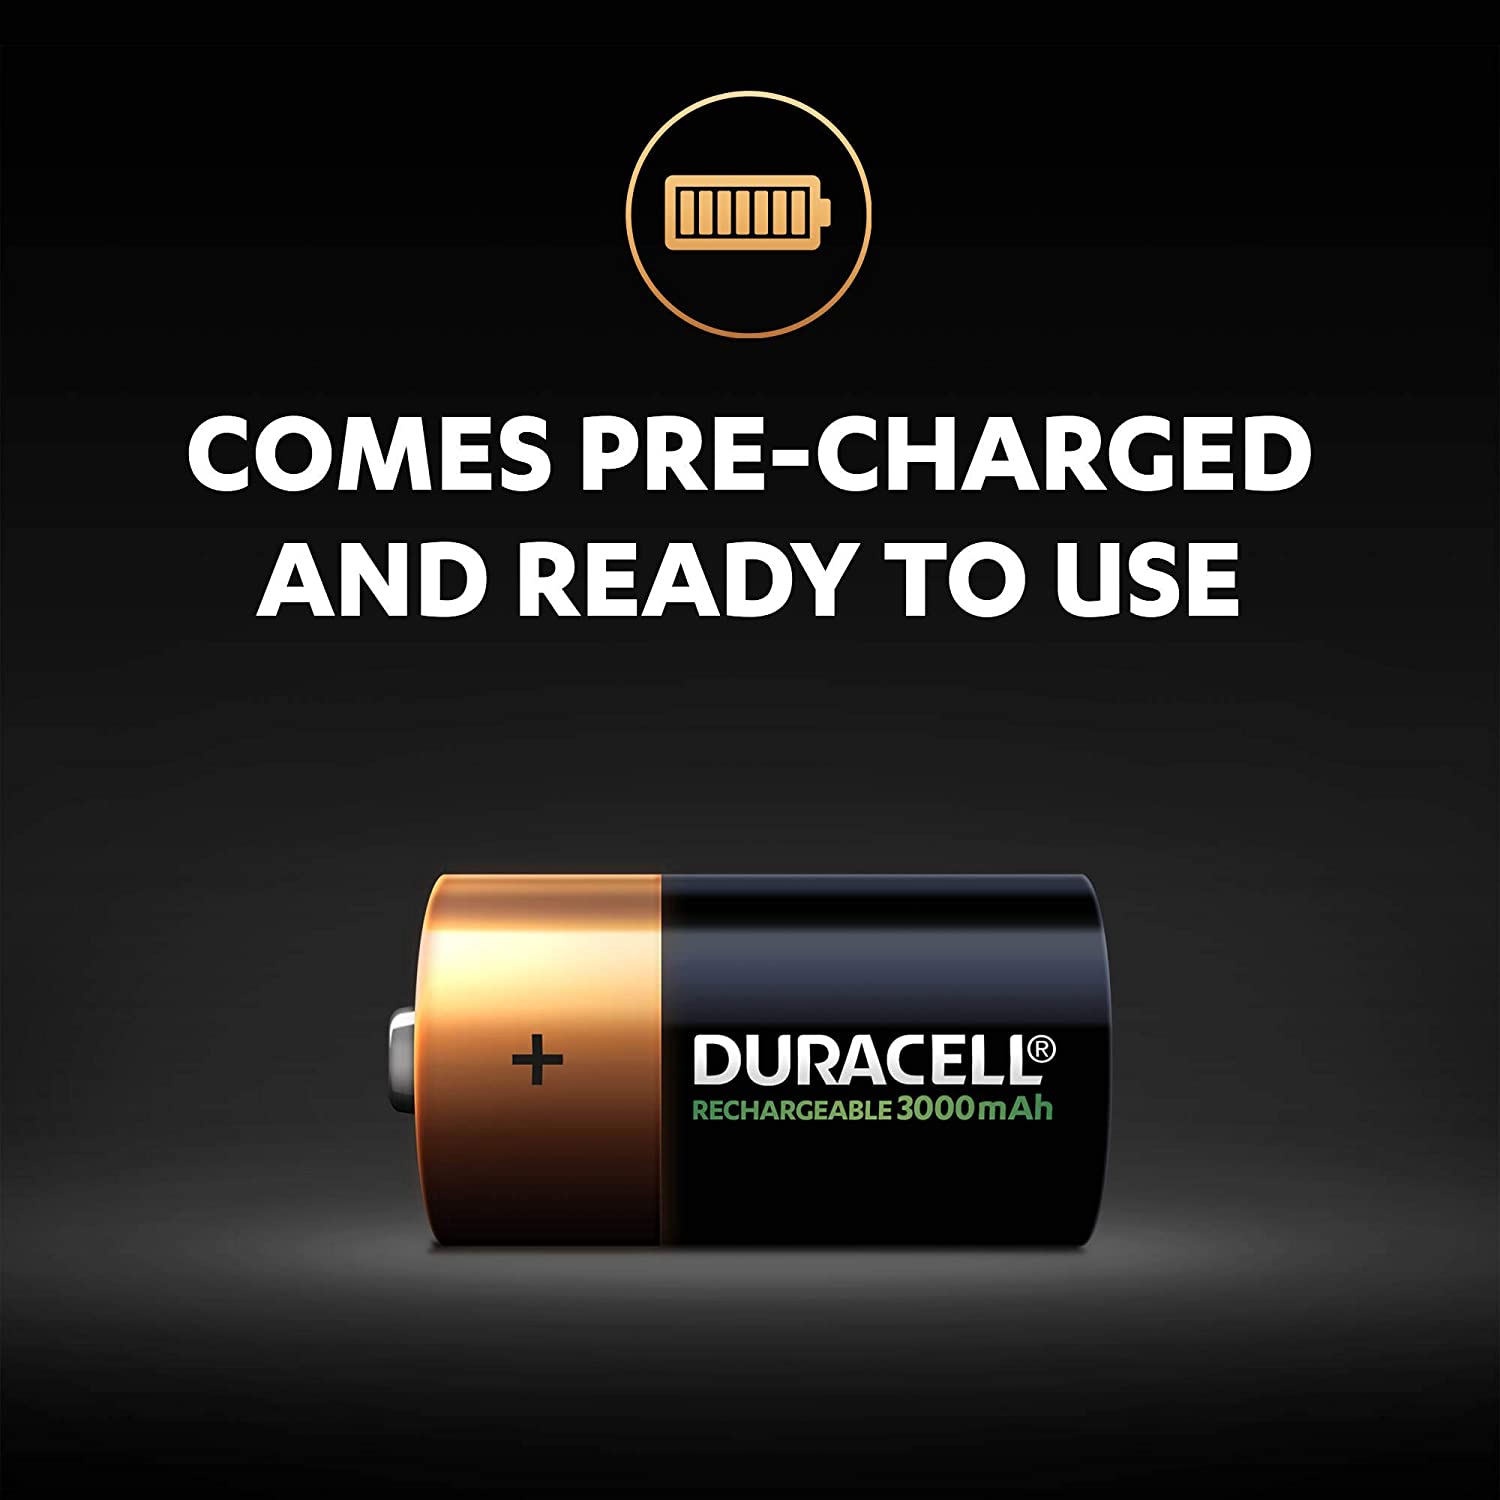 Duracell Rechargeable C 3000 mAh Batteries, pack of 2 - Healthxpress.ie